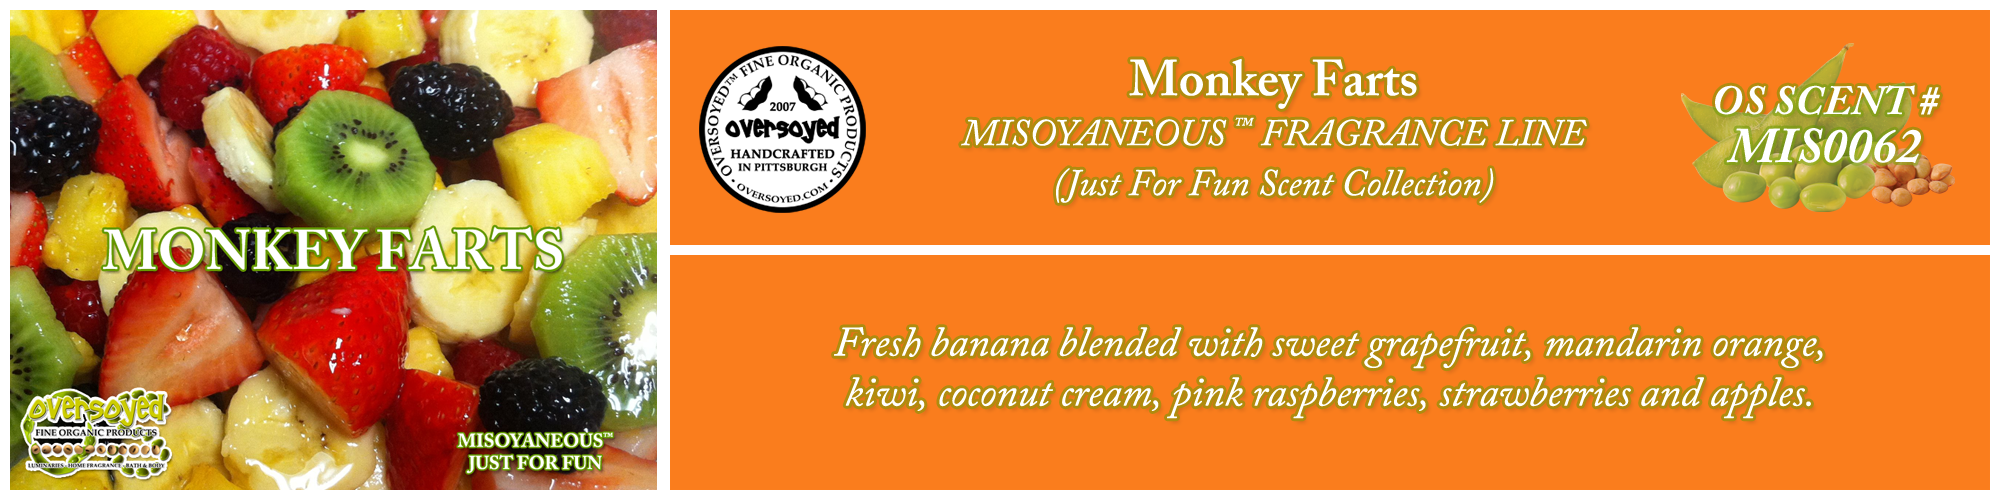 Monkey Farts Handcrafted Products Collection